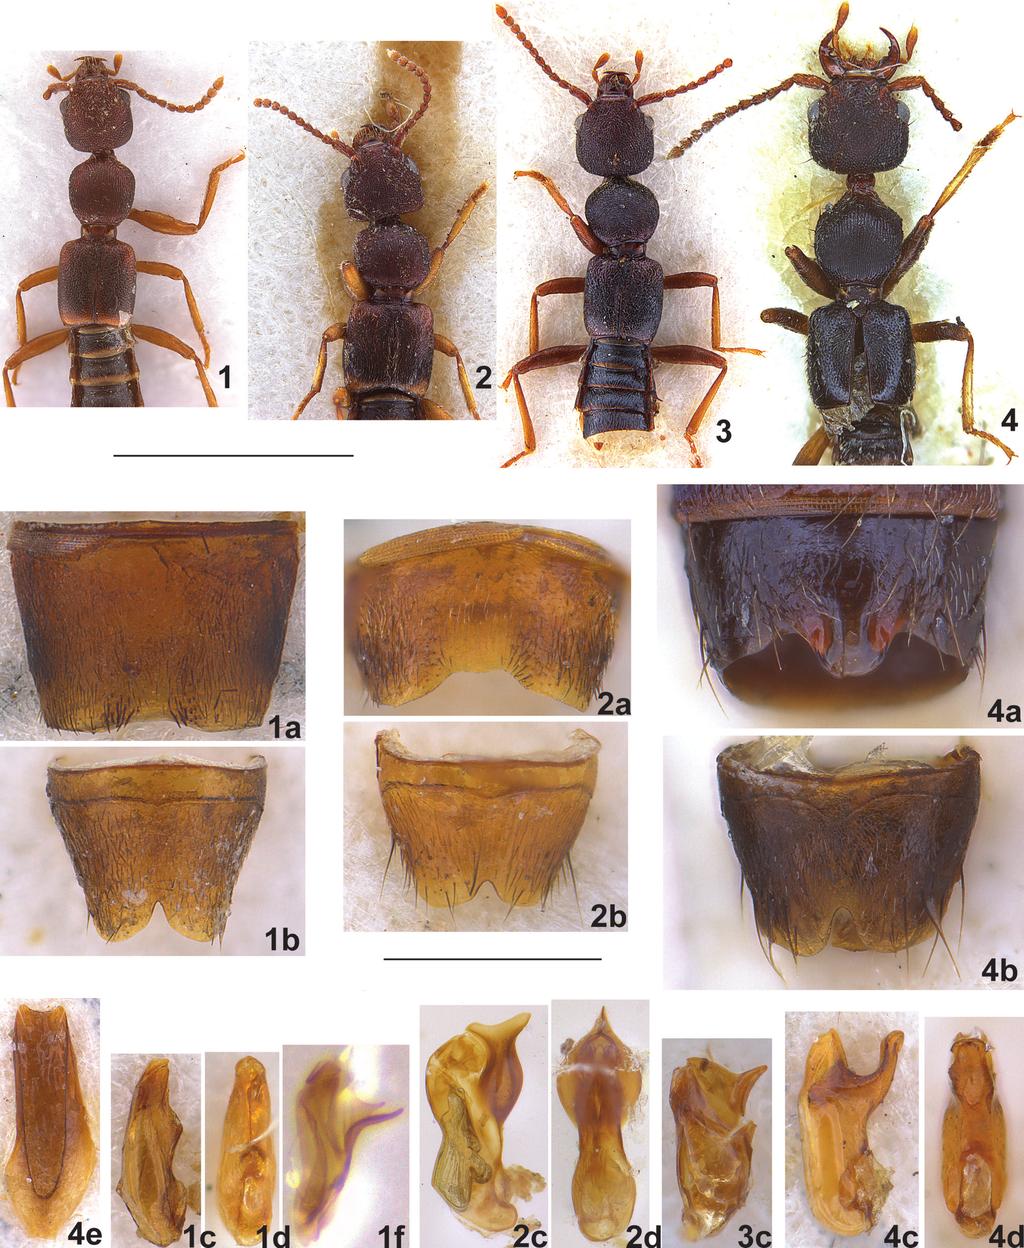 DE ROUGEMONT, THREE NEW SPECIES OF MEDOME CAMERON 133 Figs. 1 4. Medome spp.